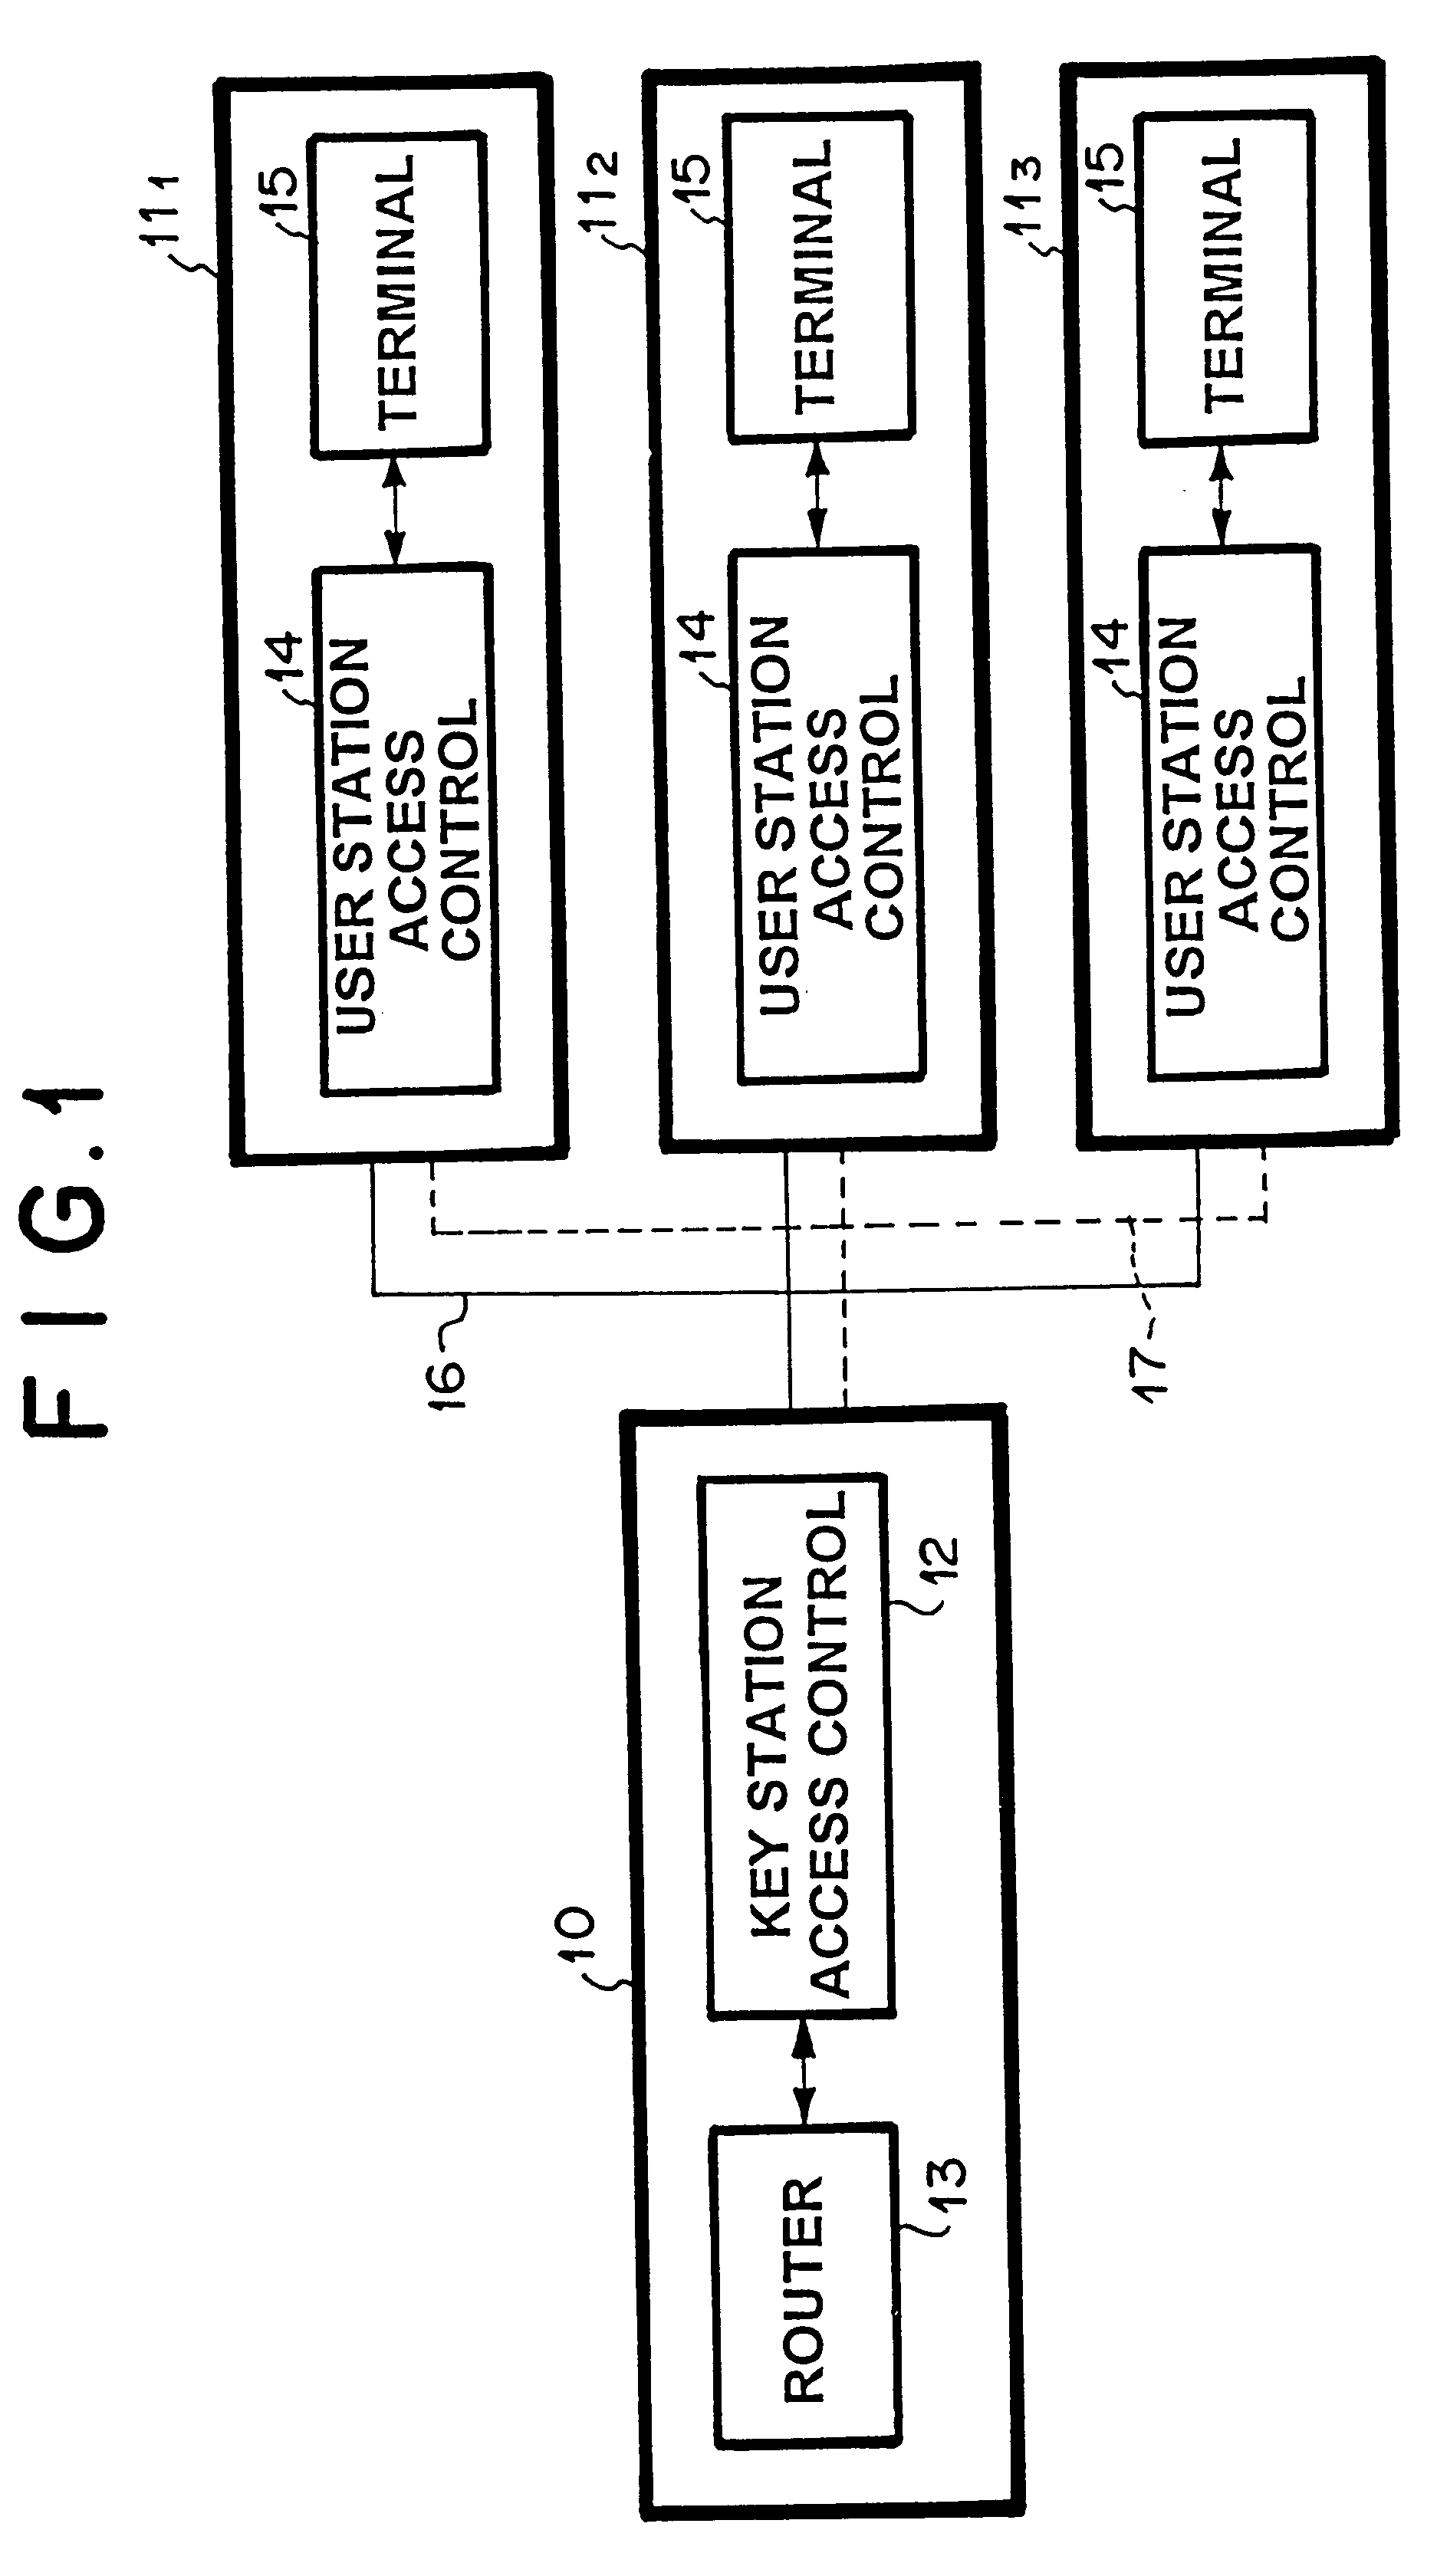 Multiple access communication system